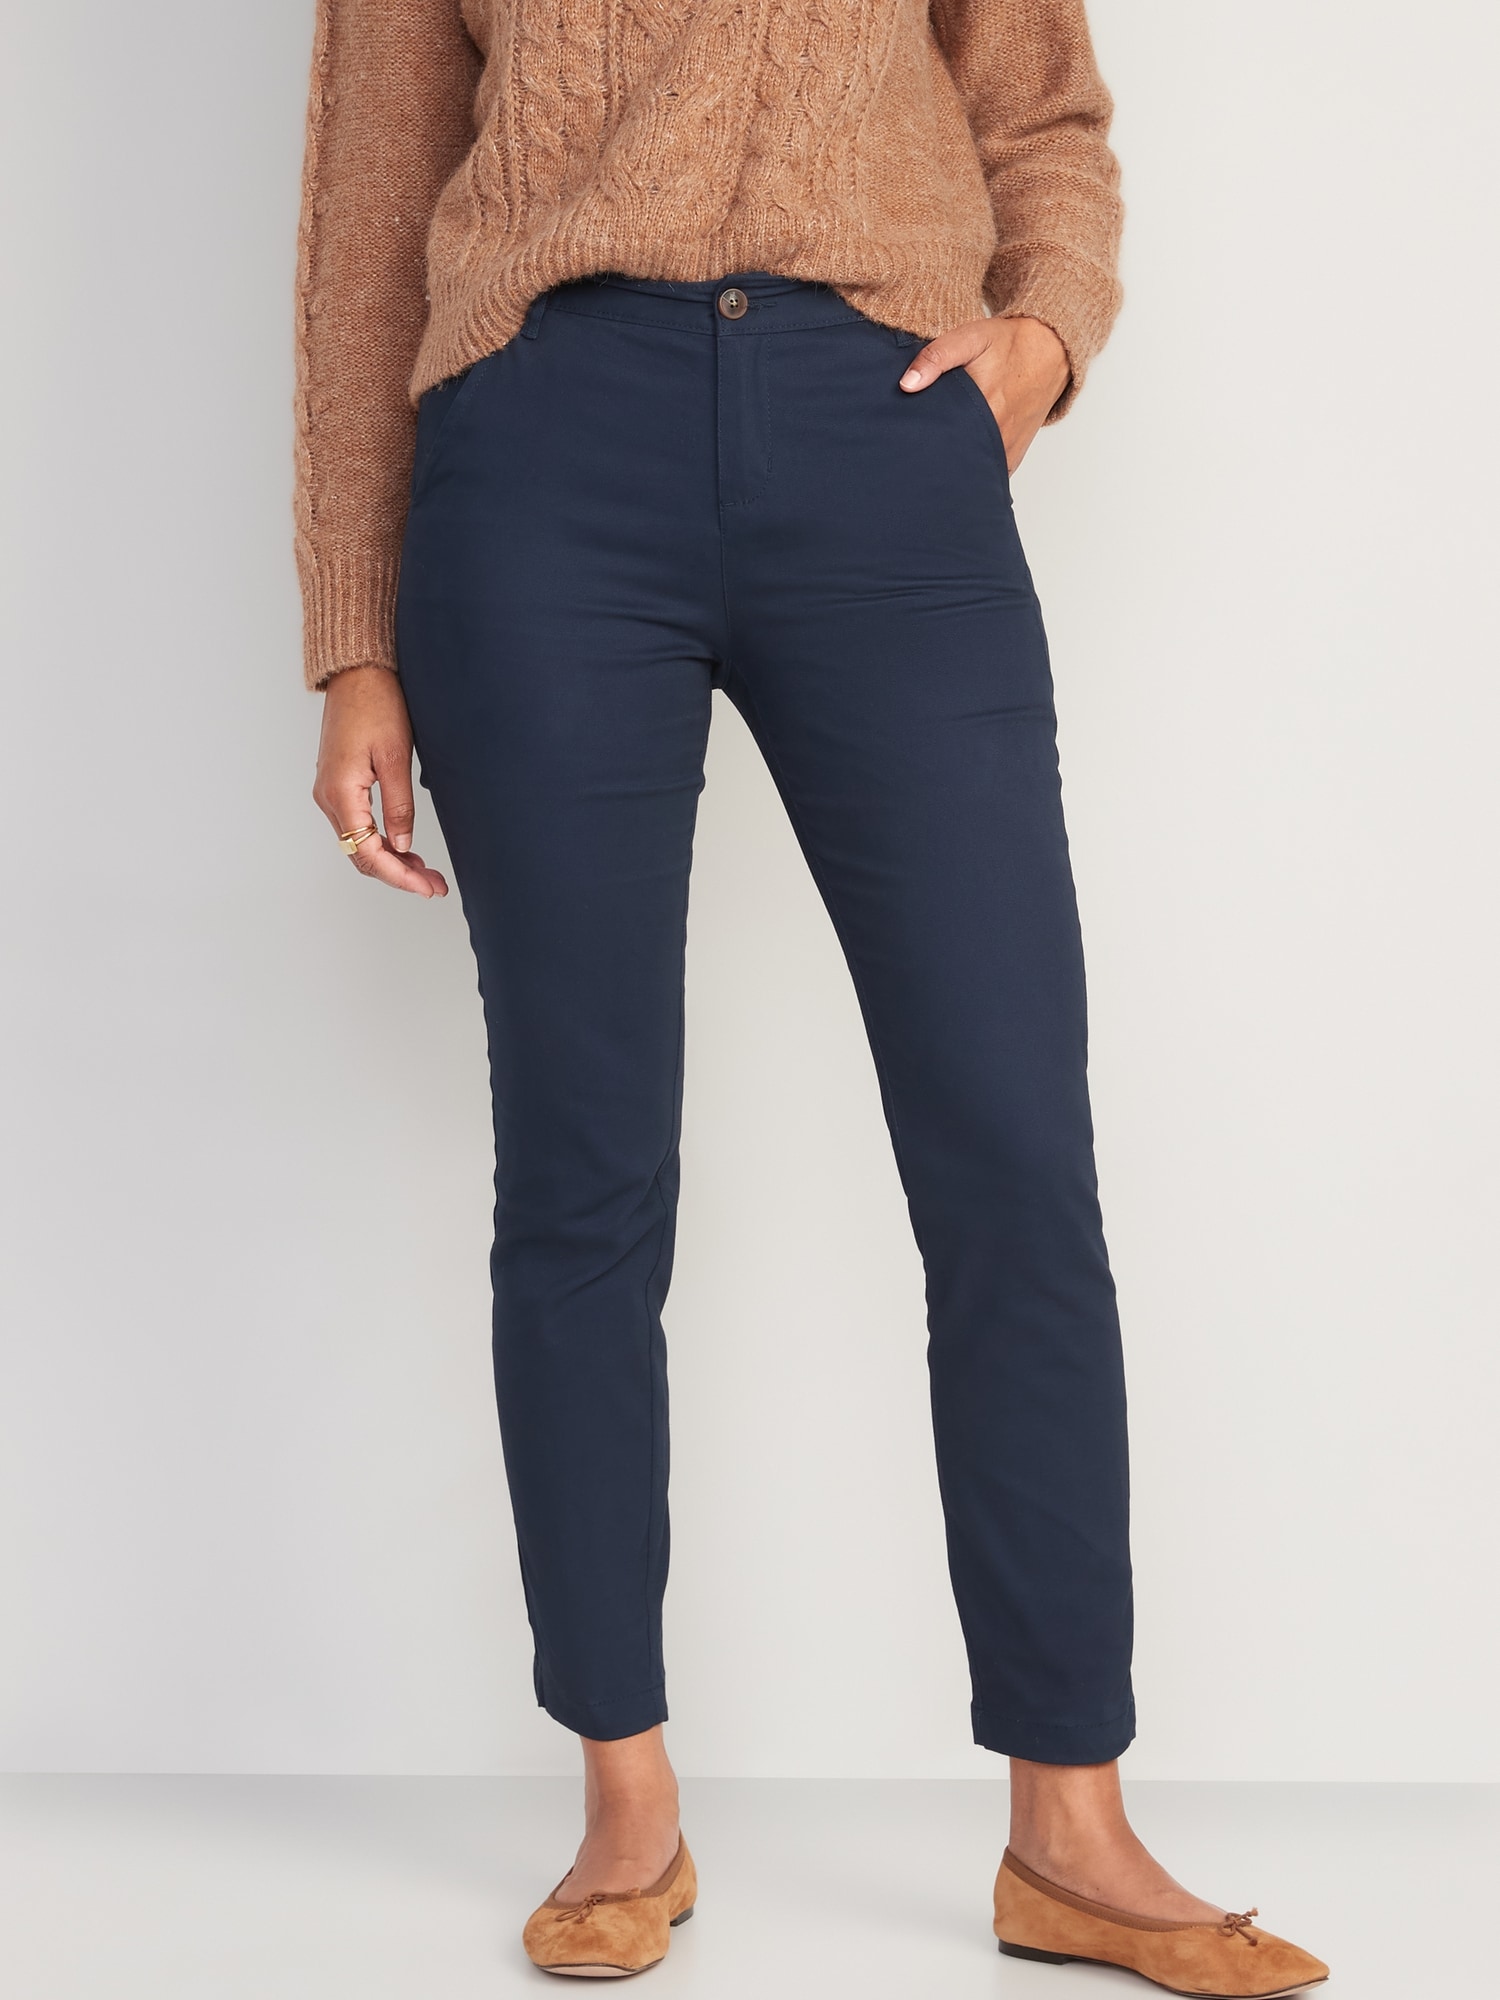 Taylor Tall | Pants for Tall Women — Taylor Tall®